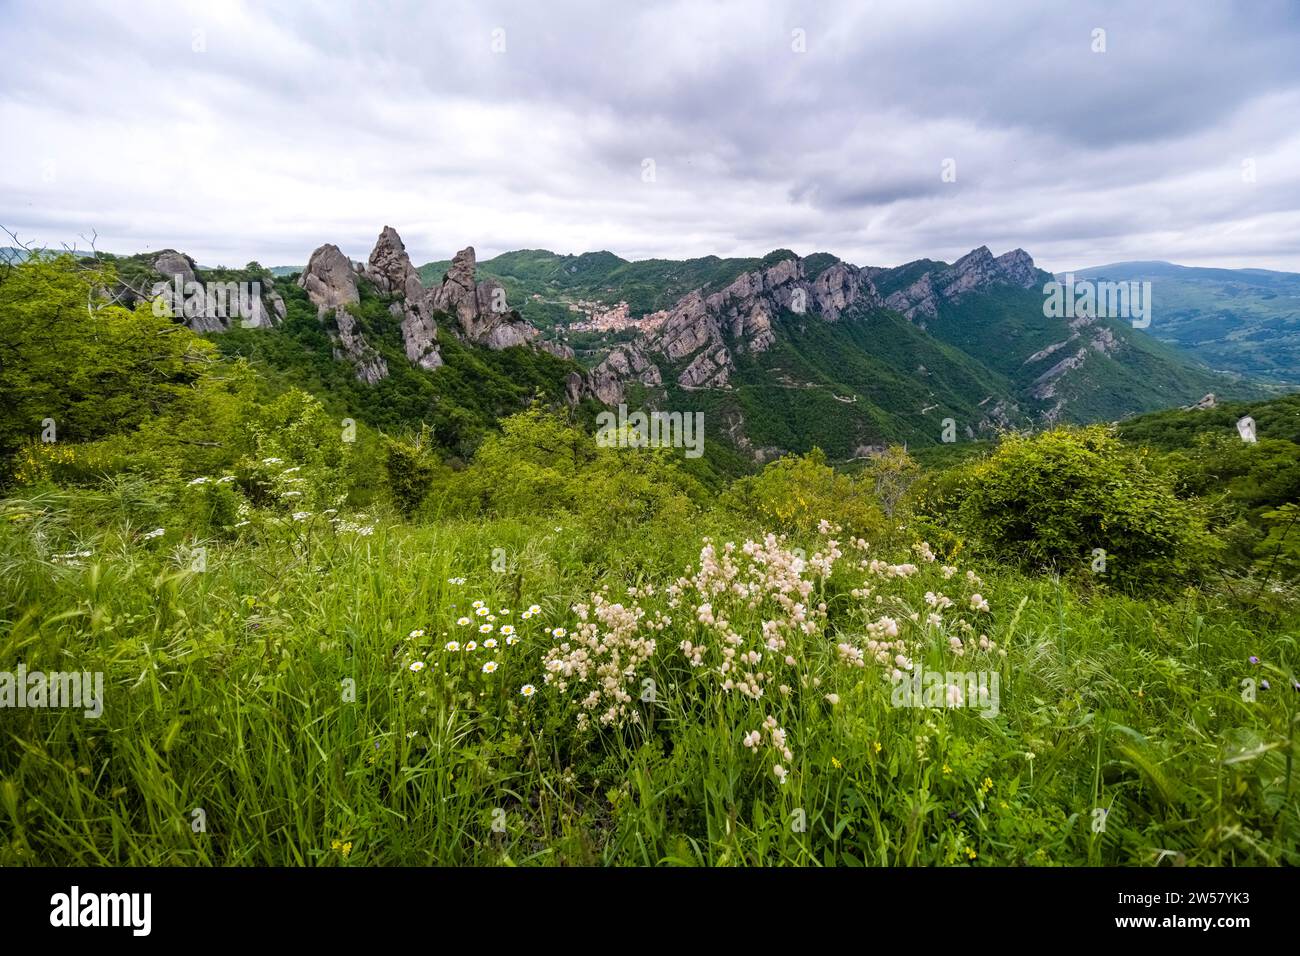 Castelmezzano, a small town in the Parco naturale di Gallipoli Cognato National Park, surrounded by rocks and mountain ridges. Stock Photo